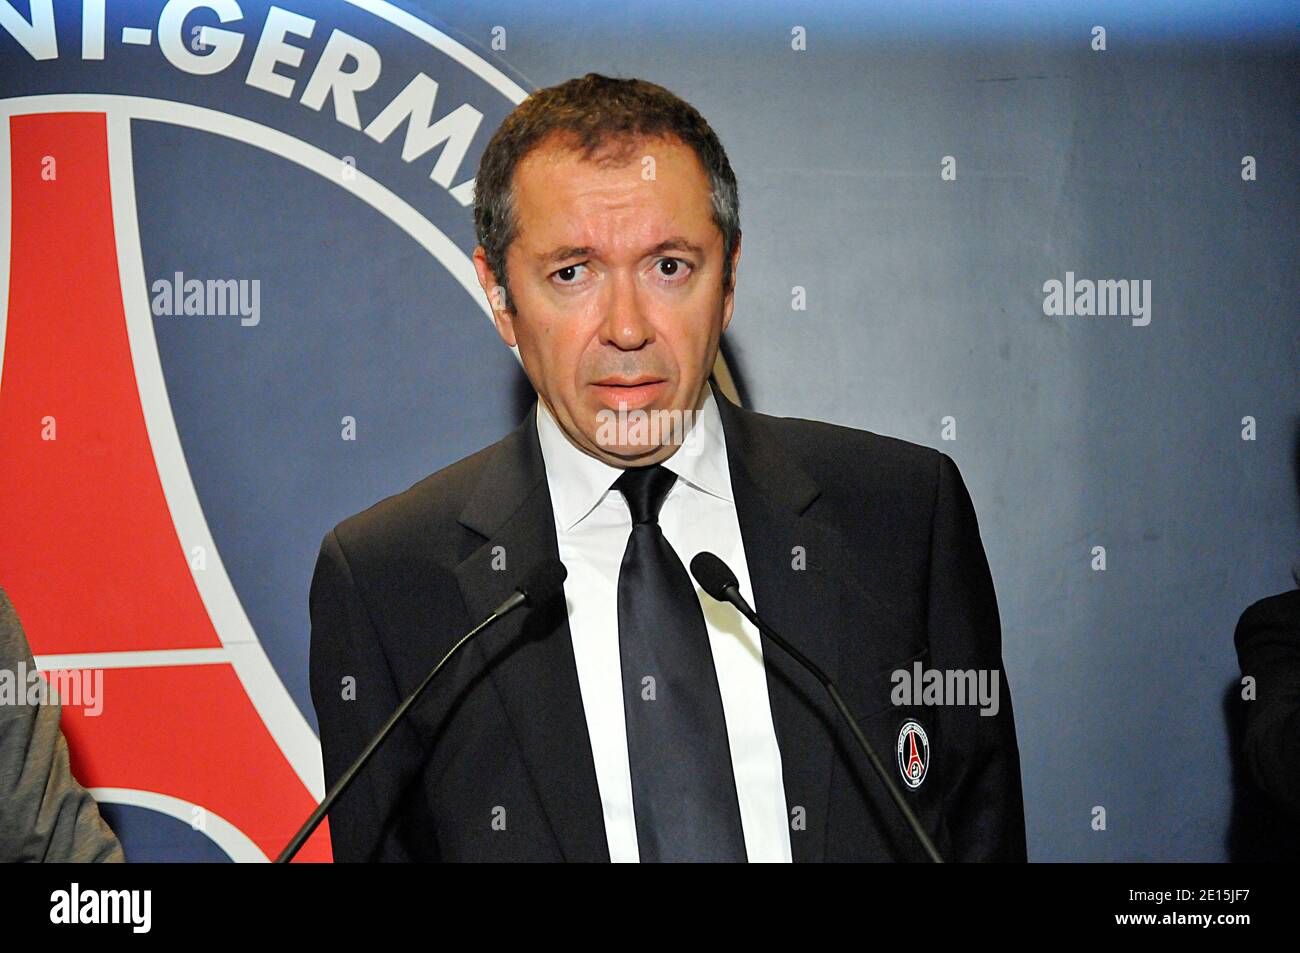 PSG's football team president Robin Leproux inaugurates the Philippe Seguin's stand during the French First League soccer match, Paris Saint-Germain vs Lorient in Paris, France on April 2, 2011. The match ended in a 0-0 draw. Photo by Thierry Plessis/ABACAPRESS.COM Stock Photo